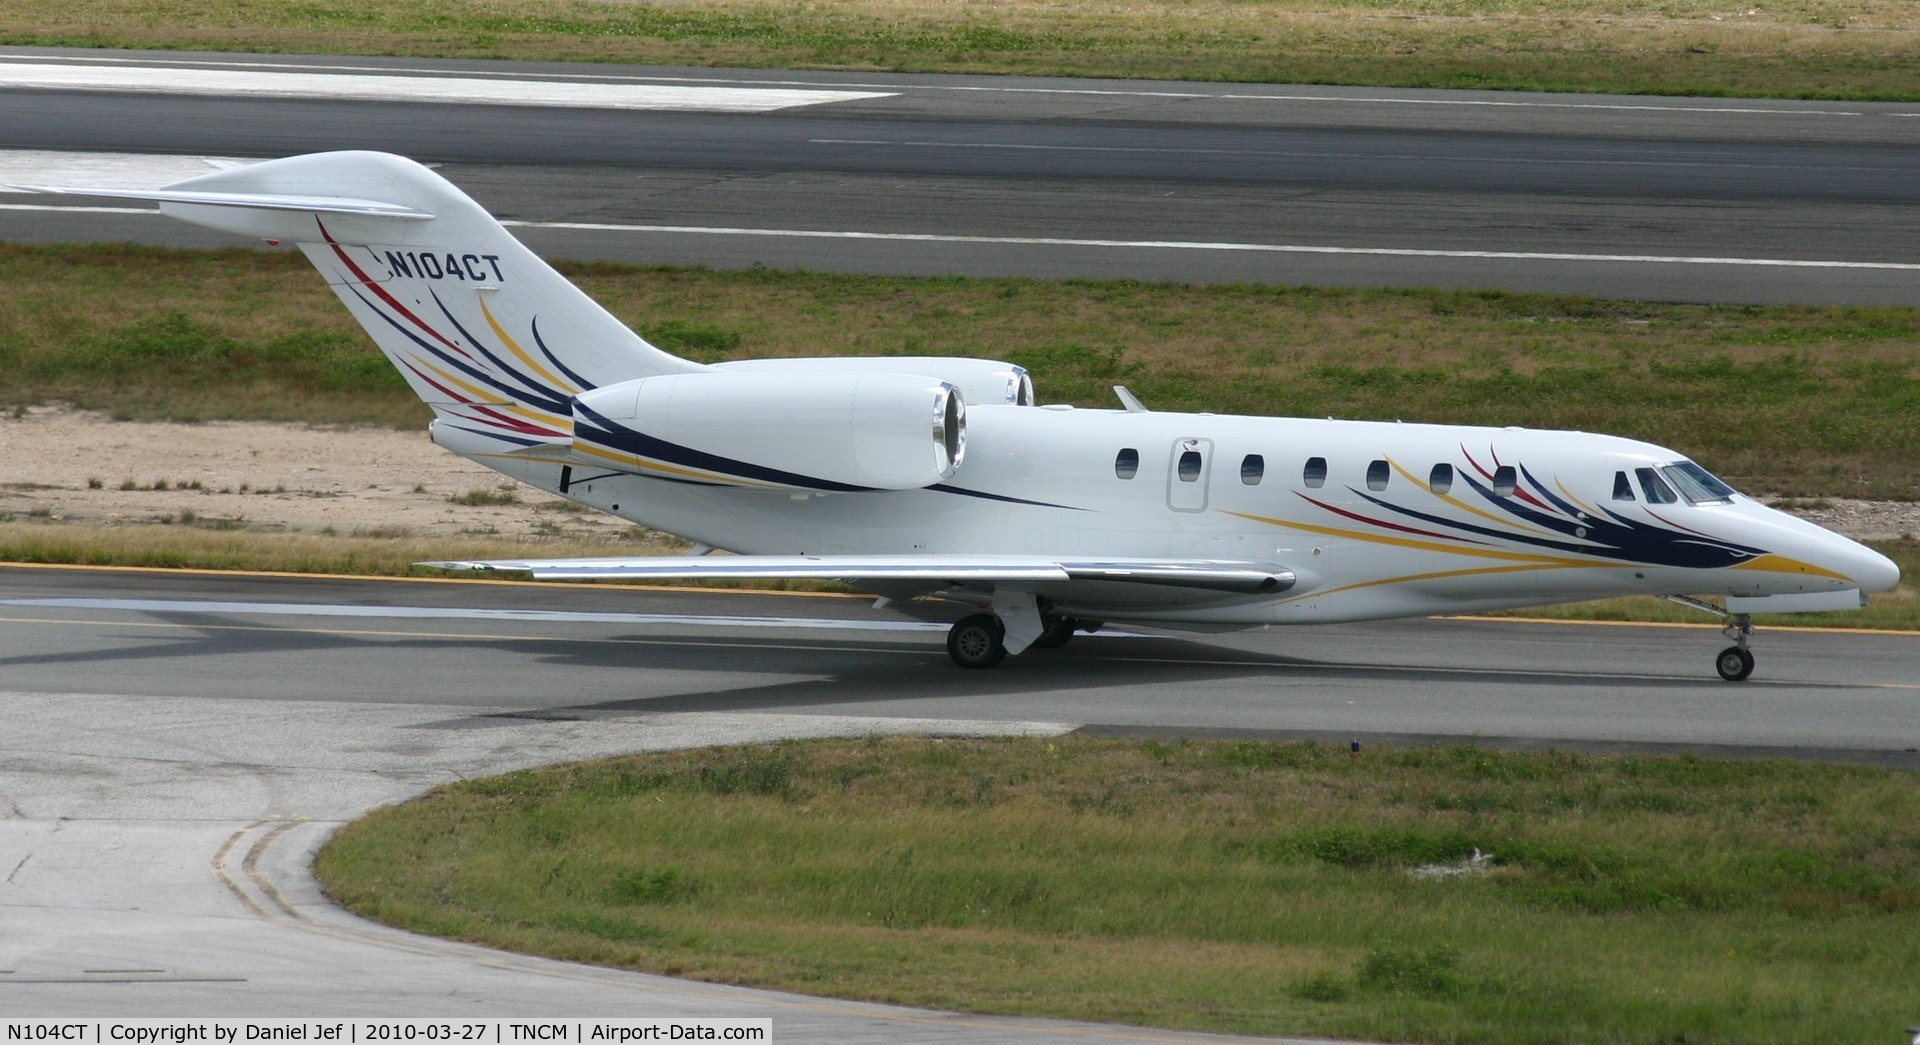 N104CT, 2007 Cessna 750 Citation X Citation X C/N 750-0275, N104CT taxing to the holding point alpha for take off TNCM